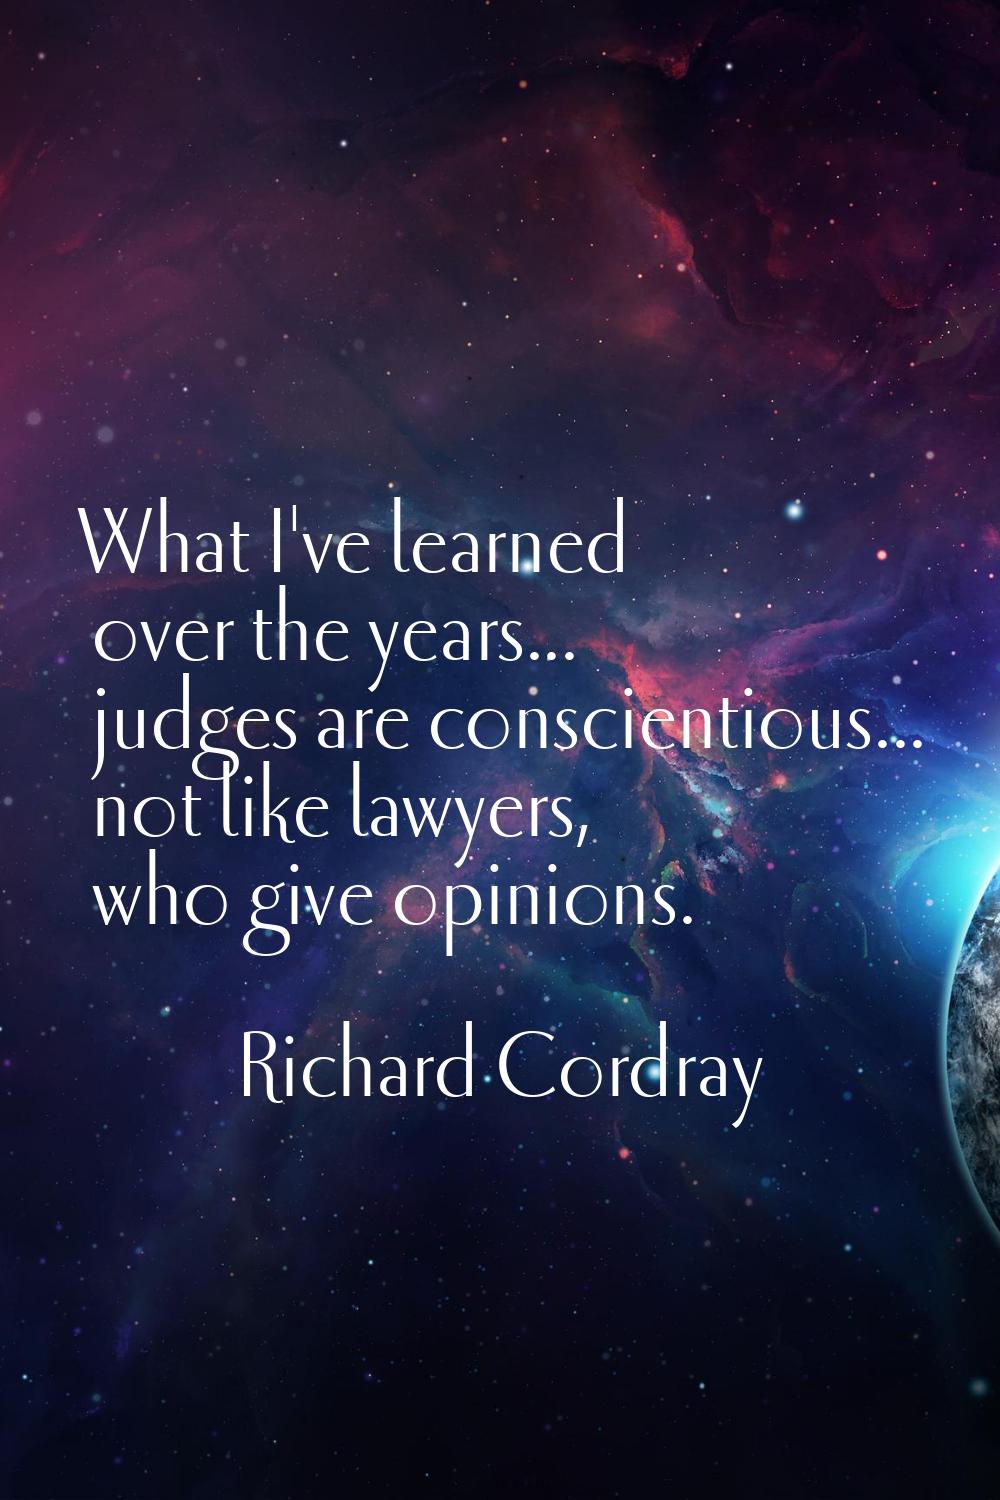 What I've learned over the years... judges are conscientious... not like lawyers, who give opinions